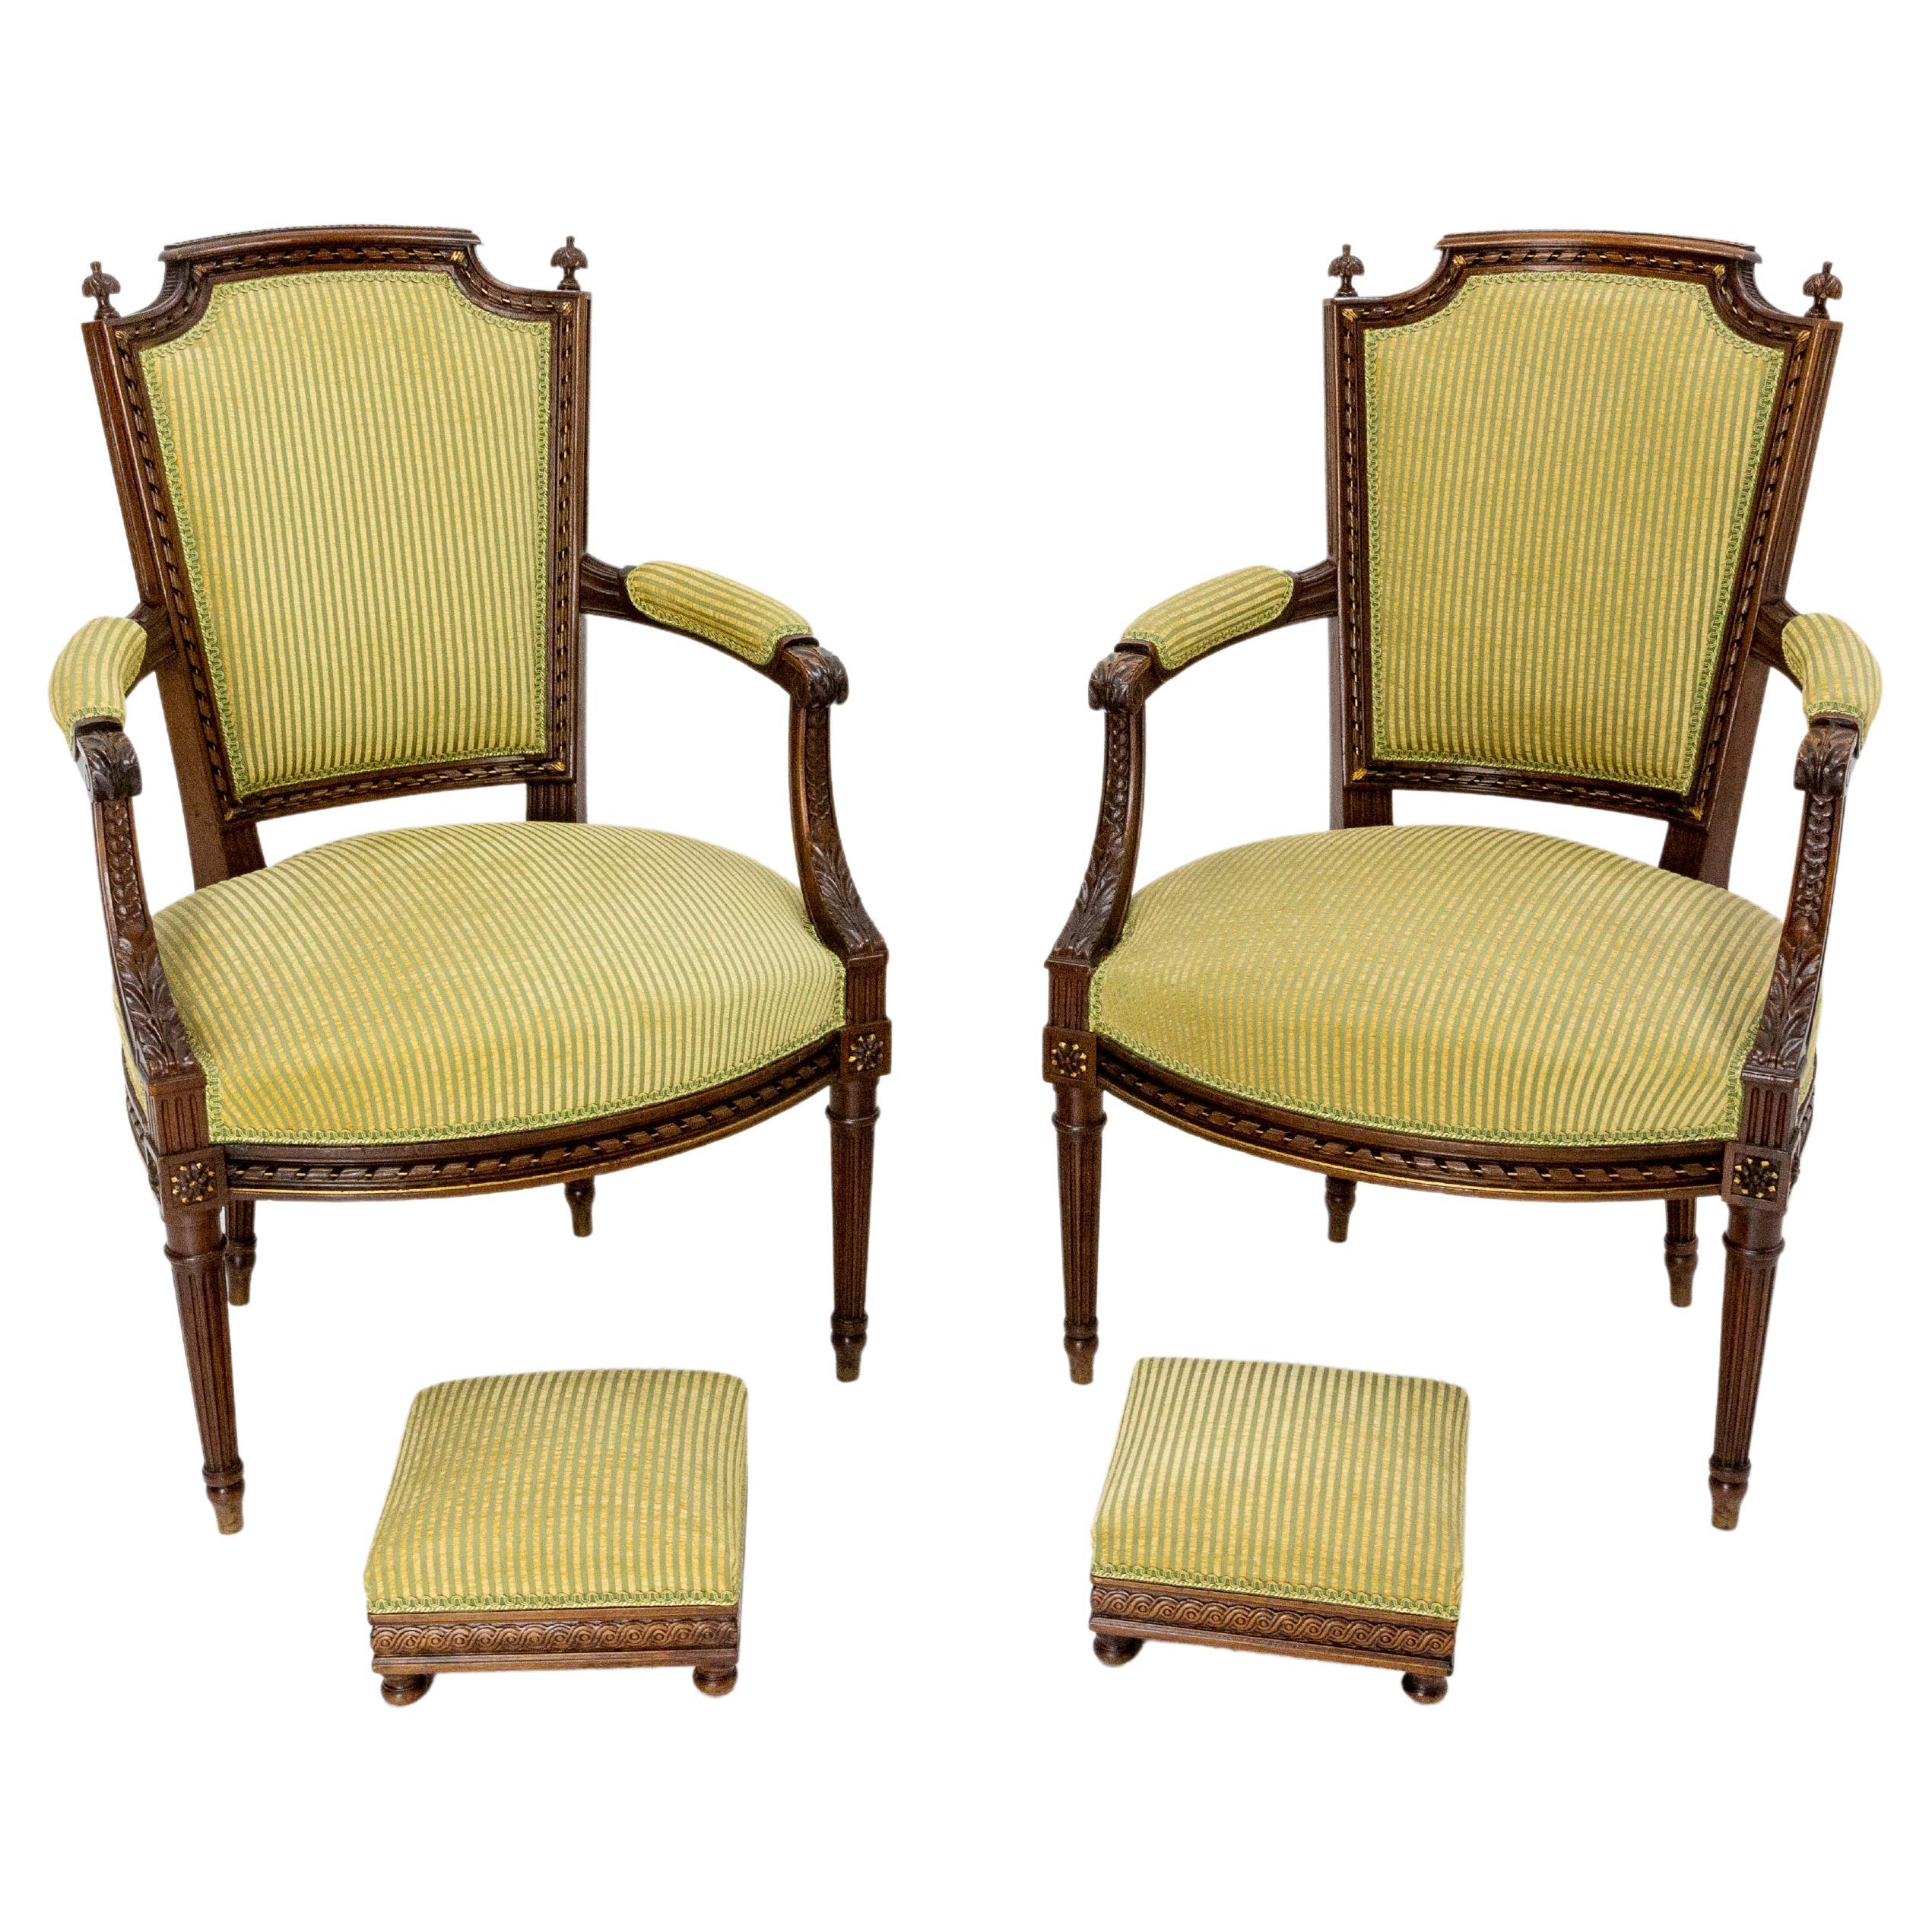 Pair of Louis XVI Revival Open Armchairs French with Footstools, Midcentury For Sale